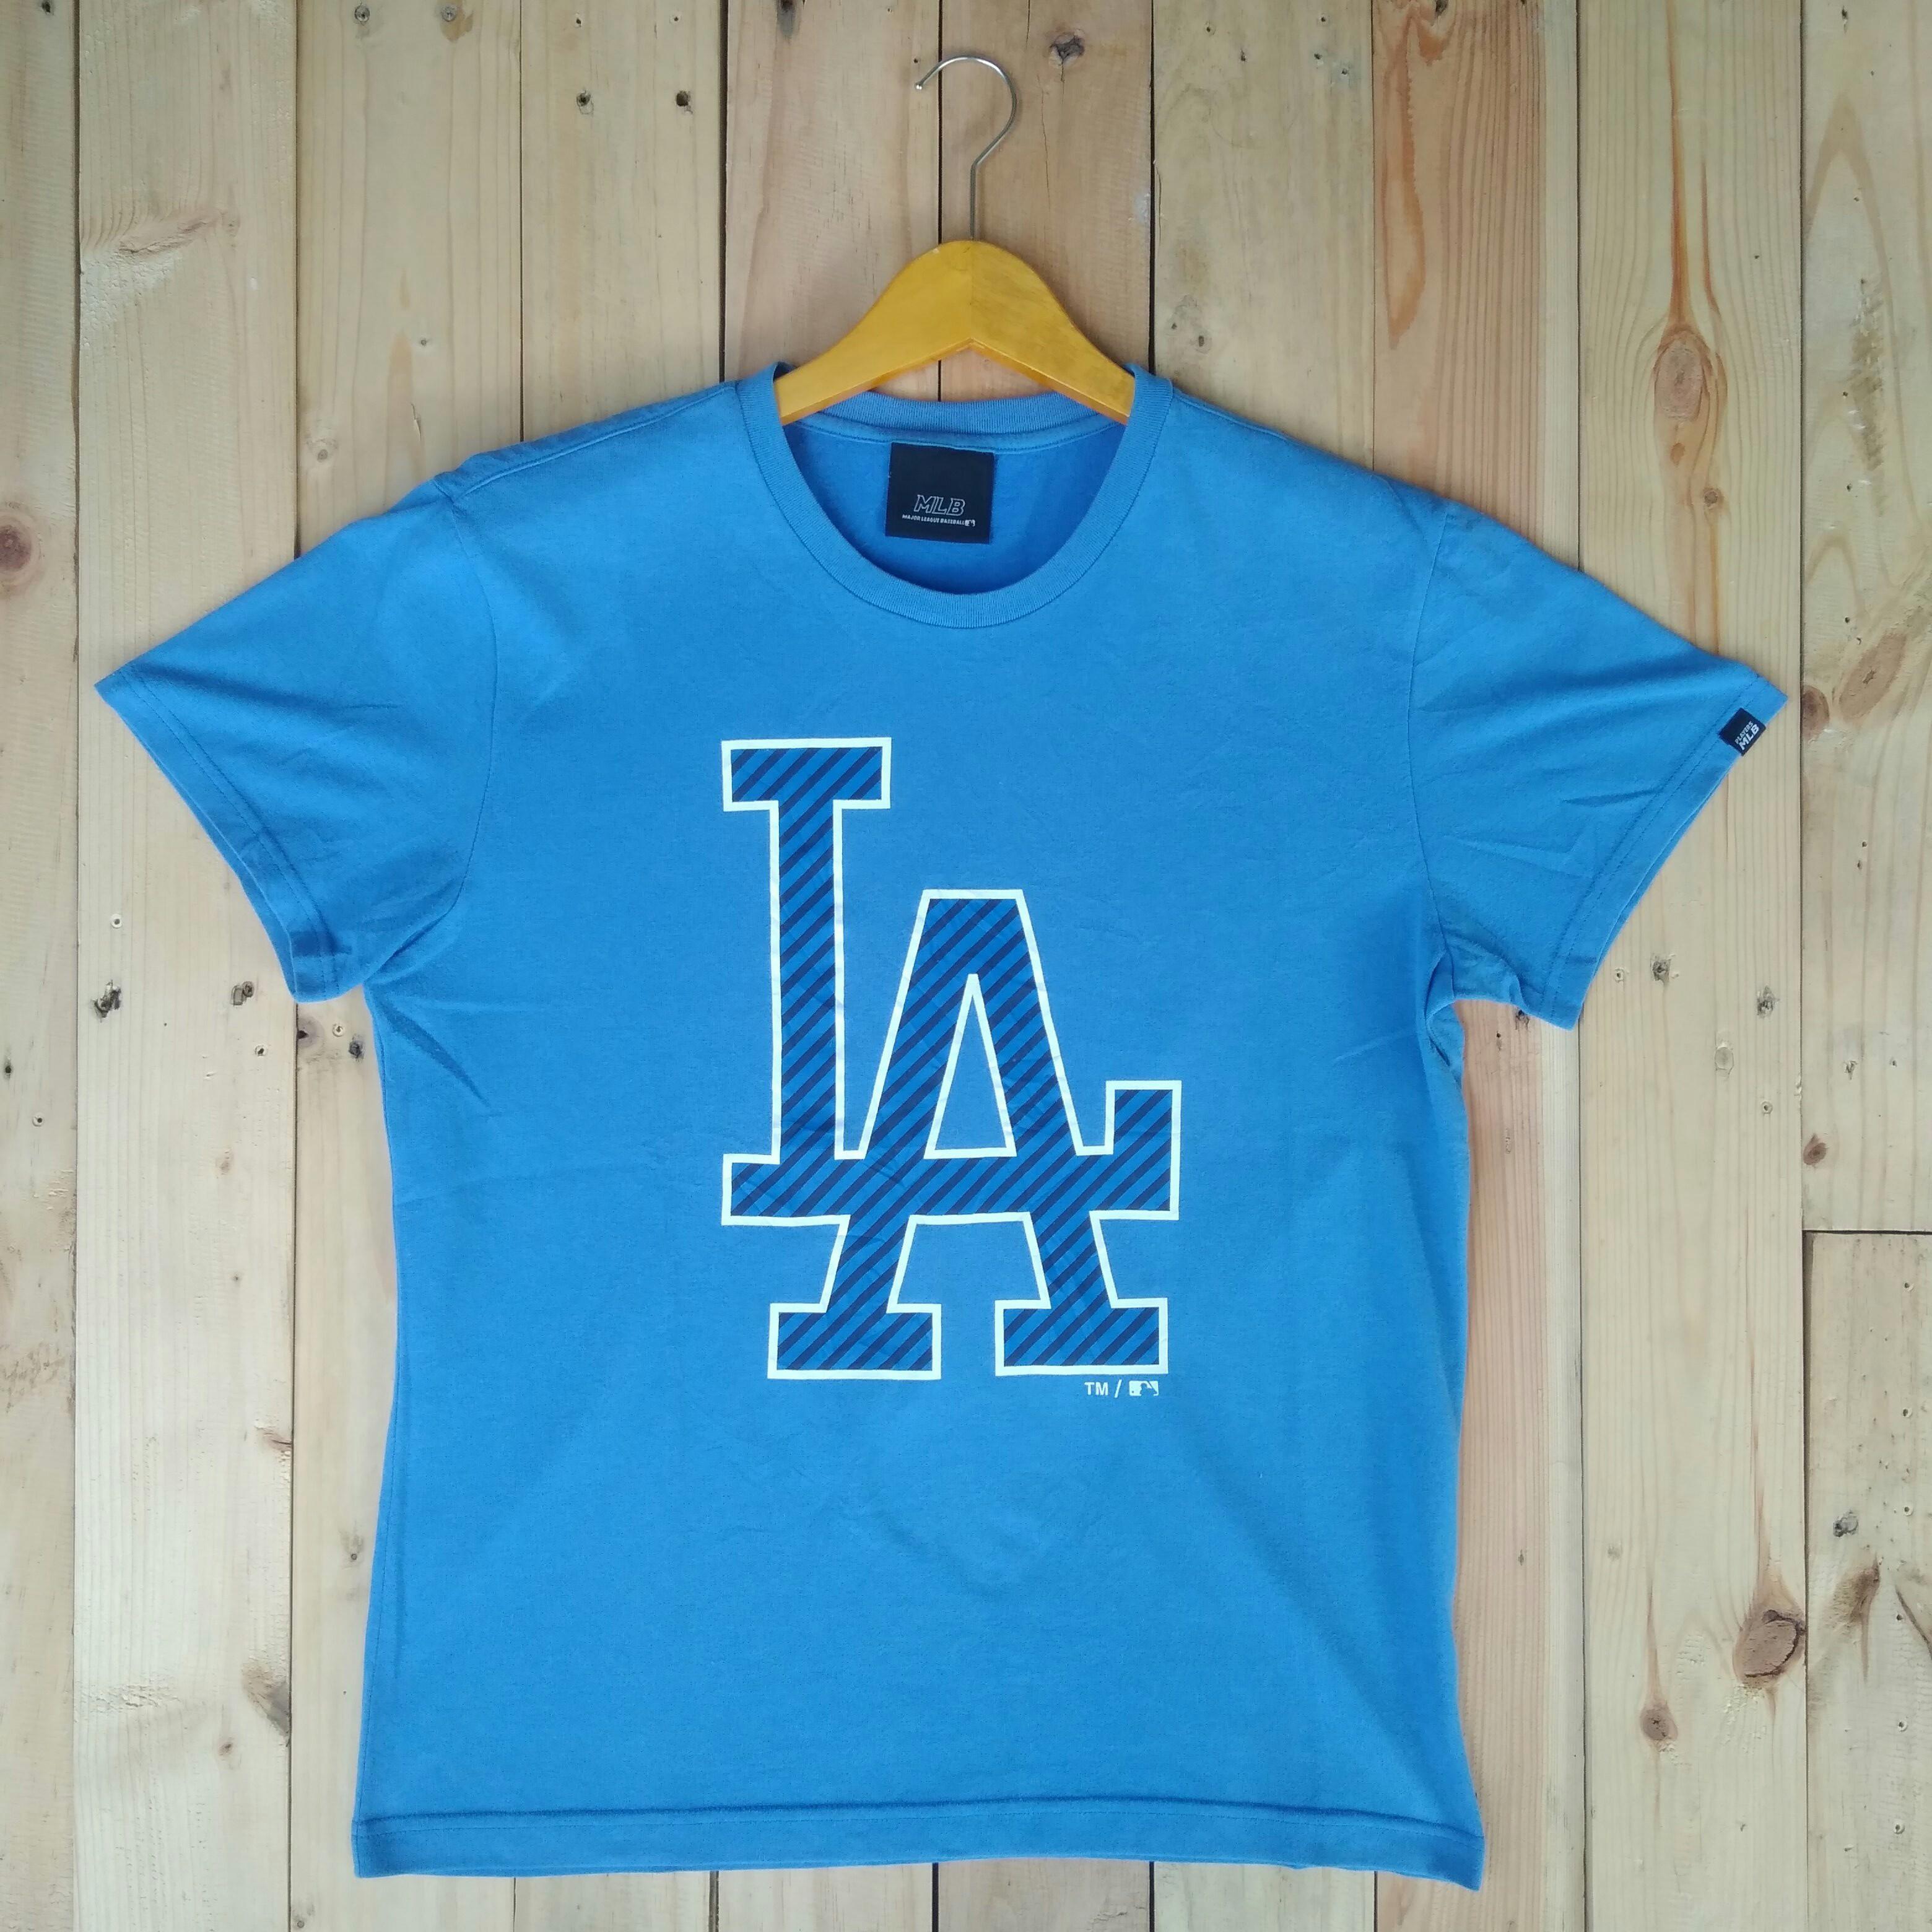 Kaos MLB official second mulus